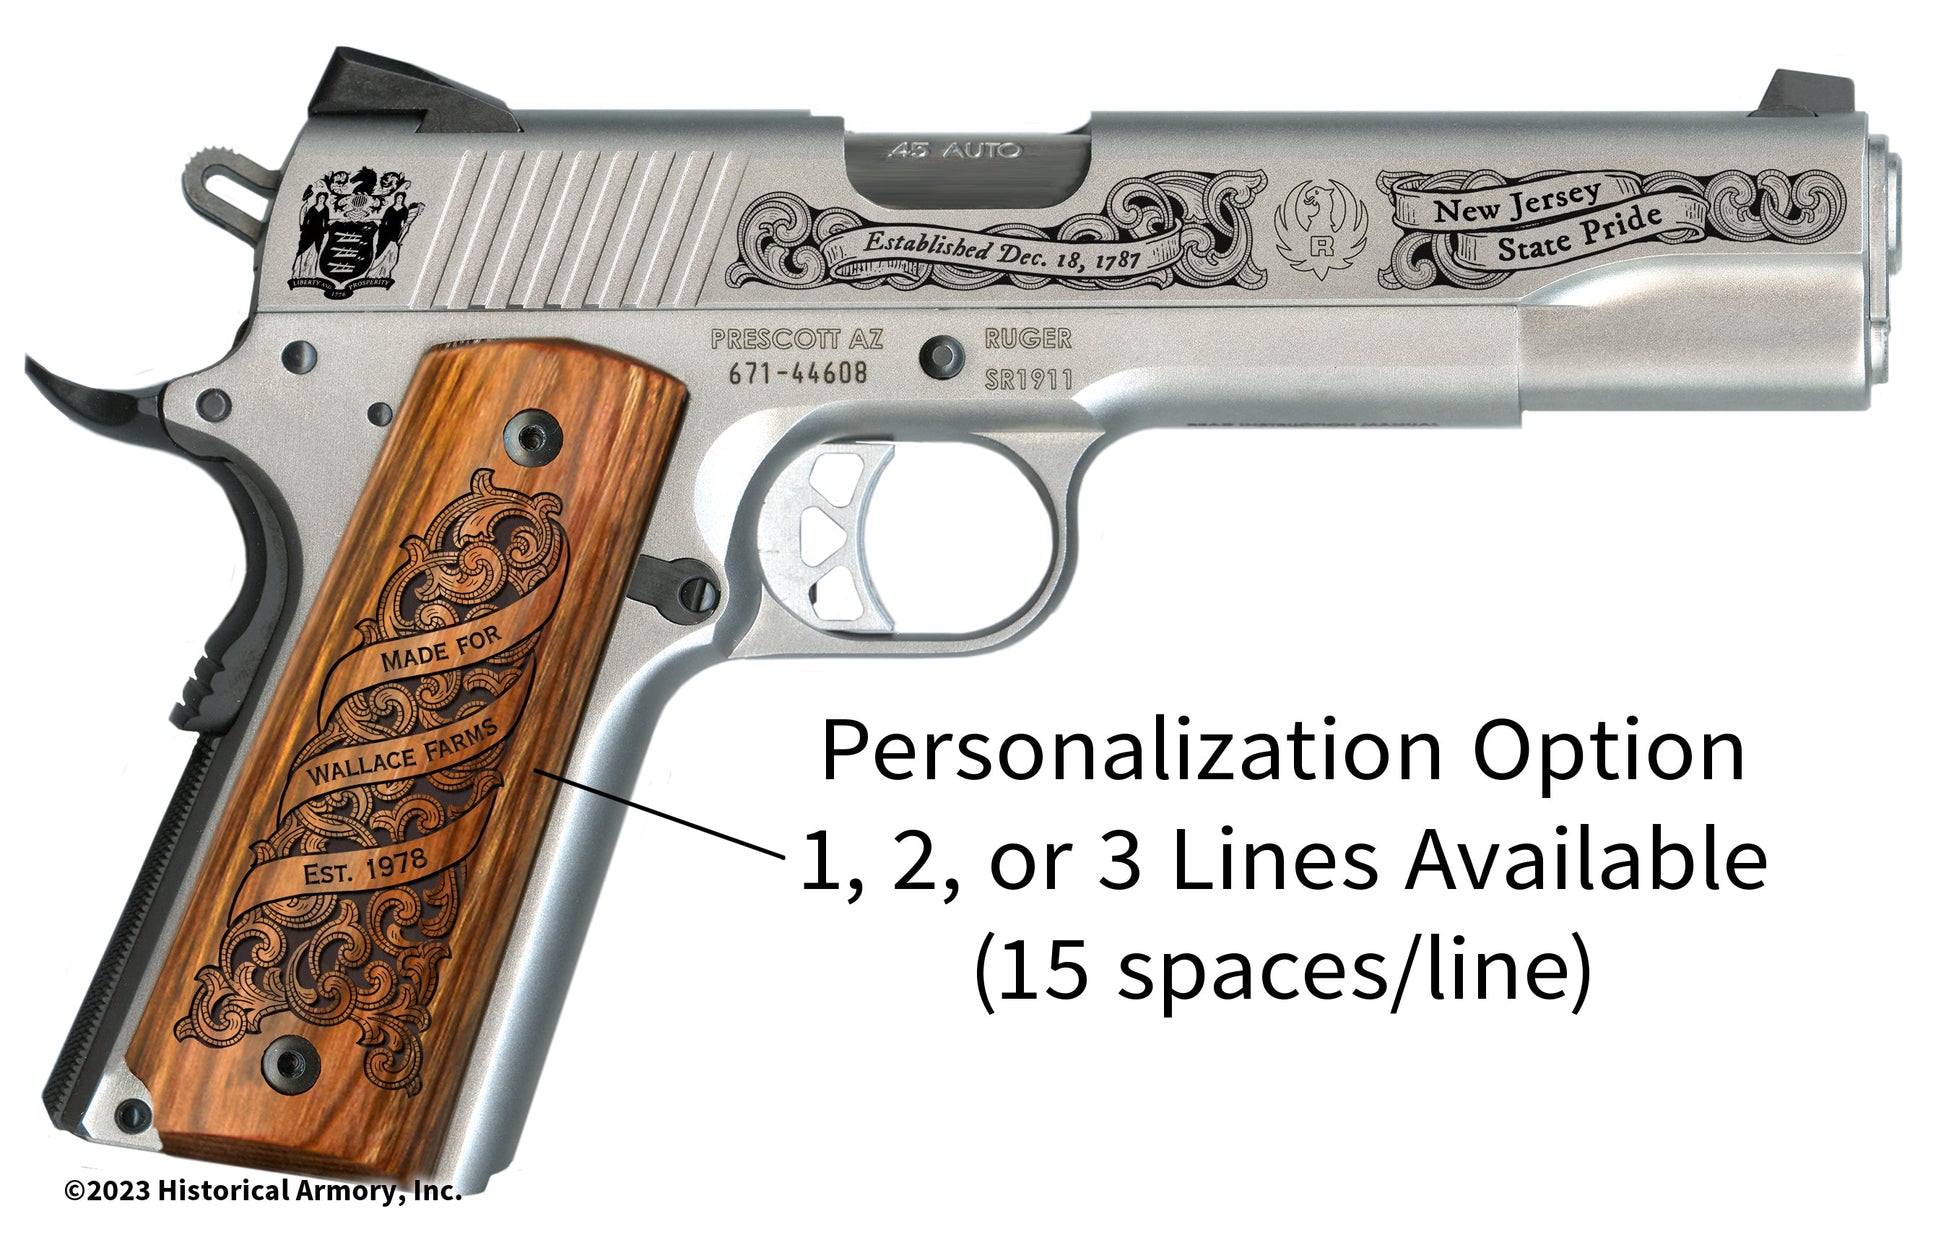 New Jersey State Pride Limited Edition Engraved 1911 Personalized Right Side Grip